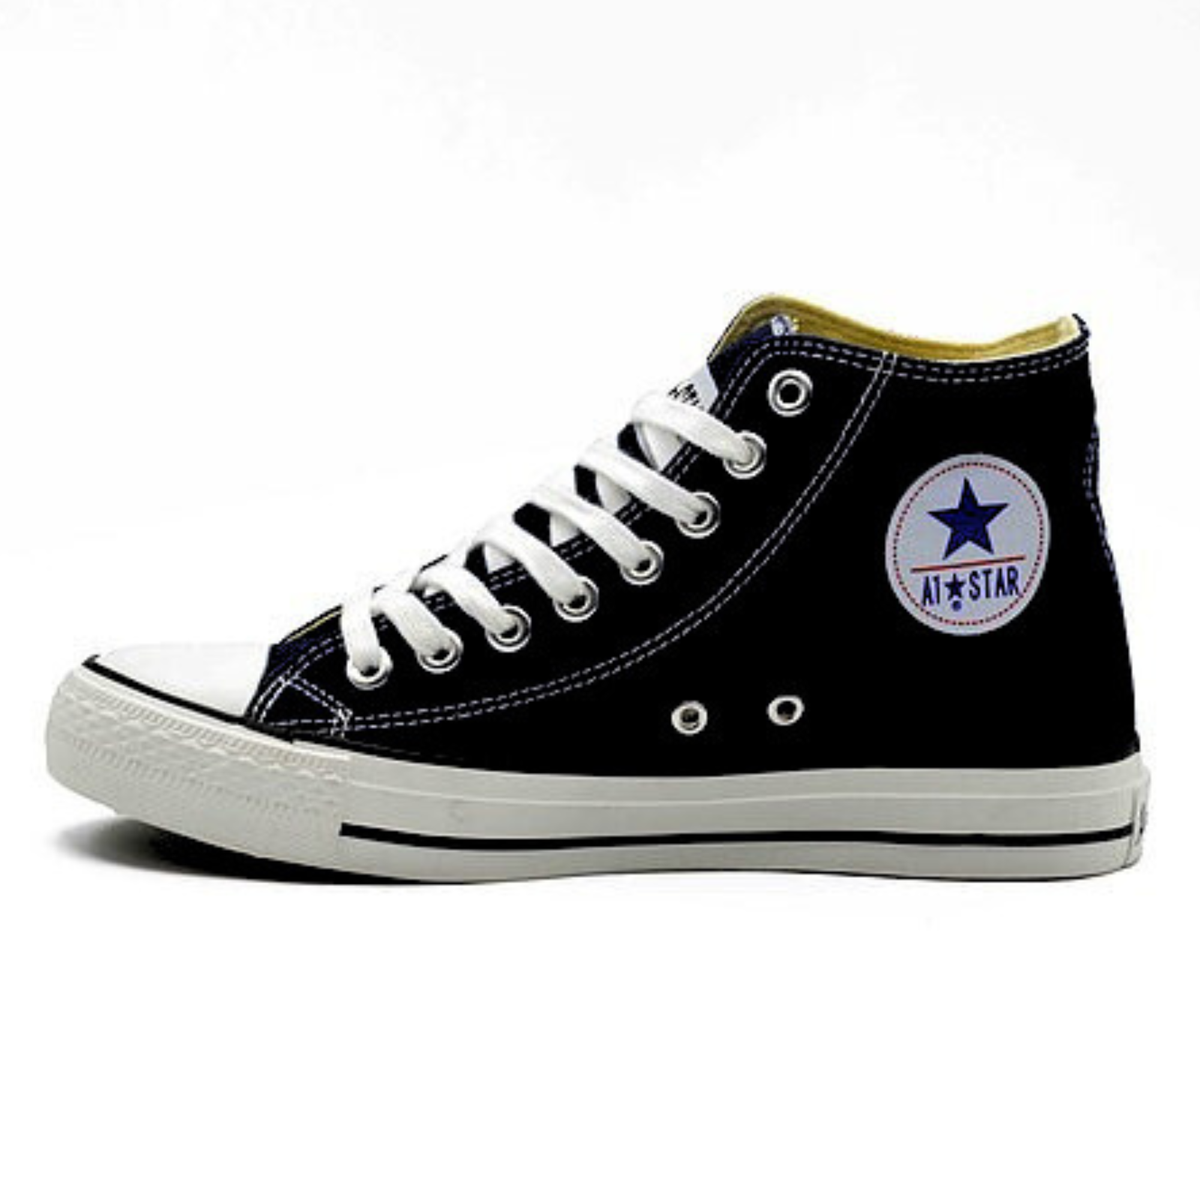 A1 Star High Top Canvas Sneaker - Black/White | Shop Today. Get it ...